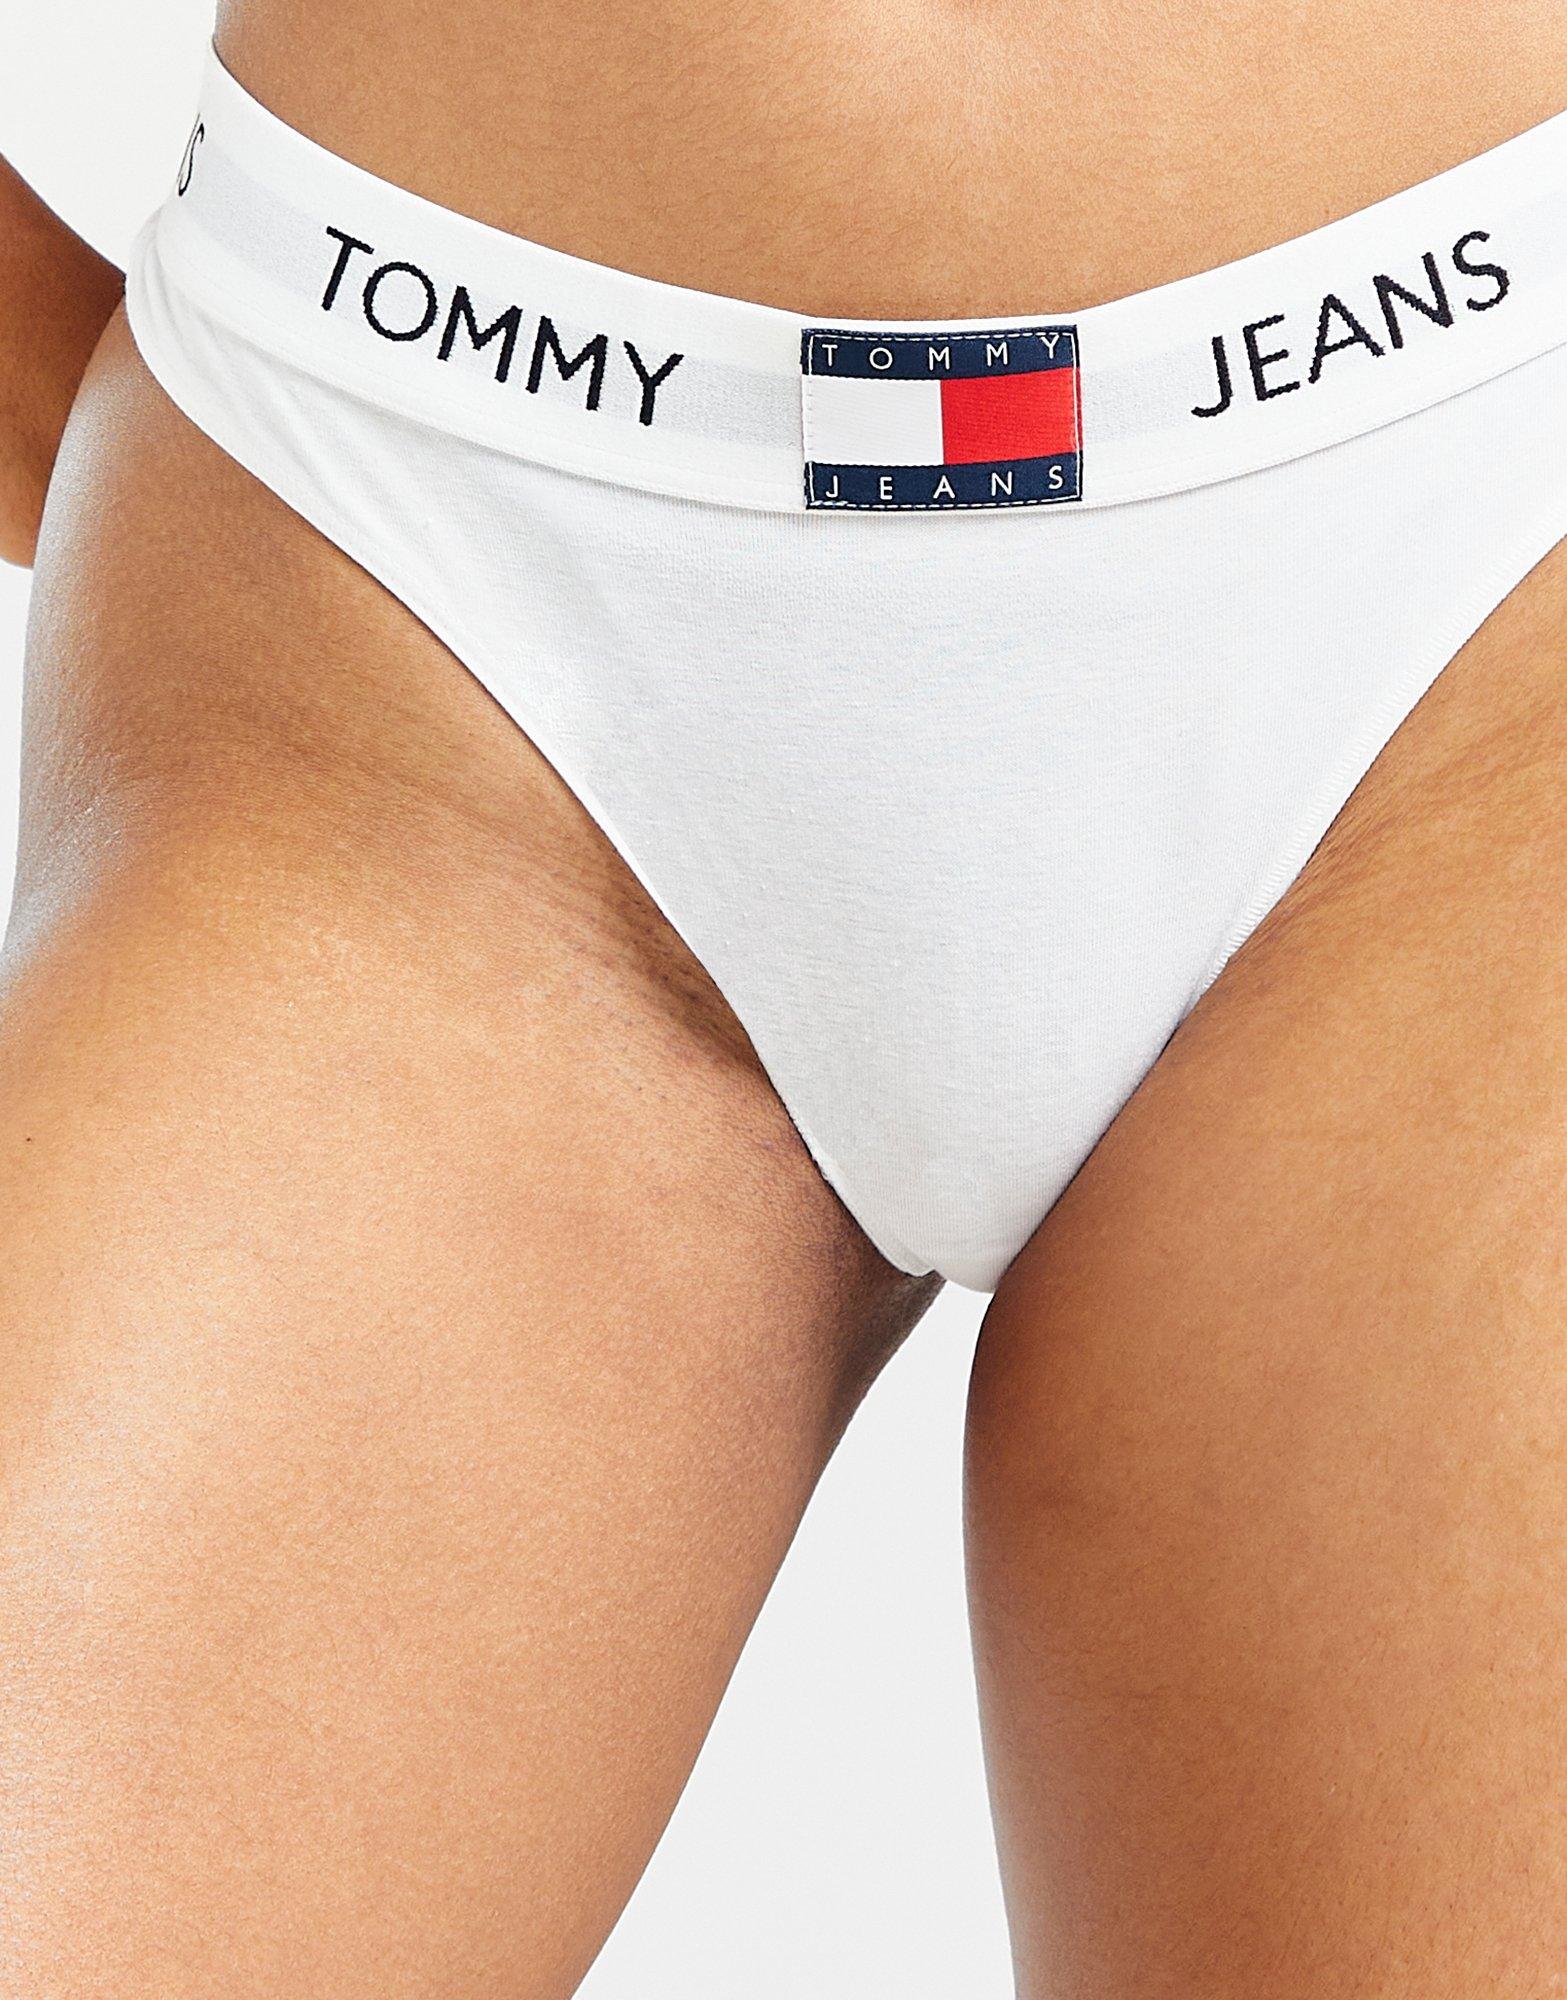 Tommy Jeans Heritage Cotton Thong